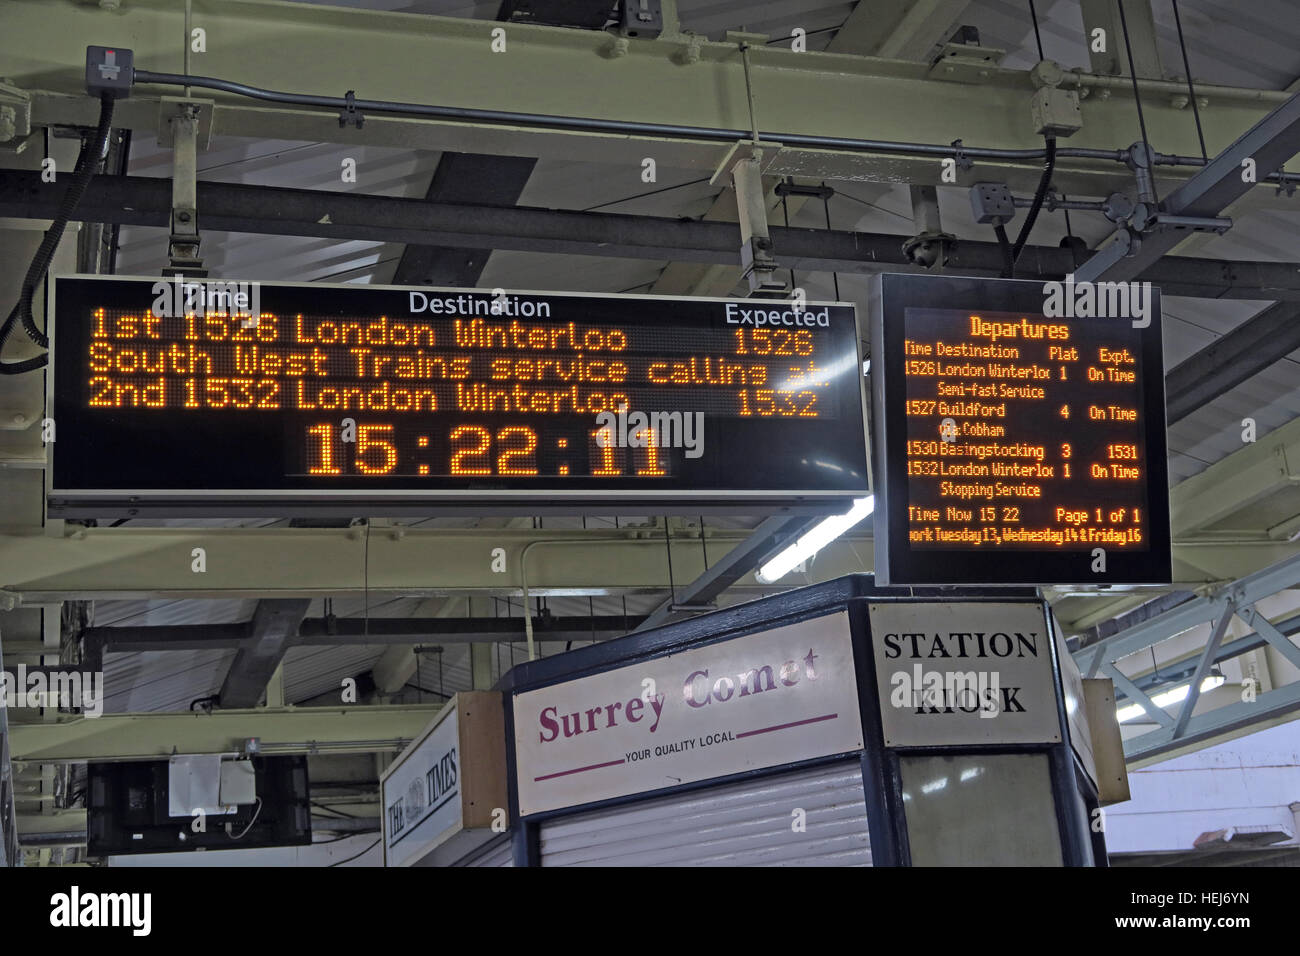 Christmas Festive Humour on South West Trains information displays, Central London,England,UK Stock Photo